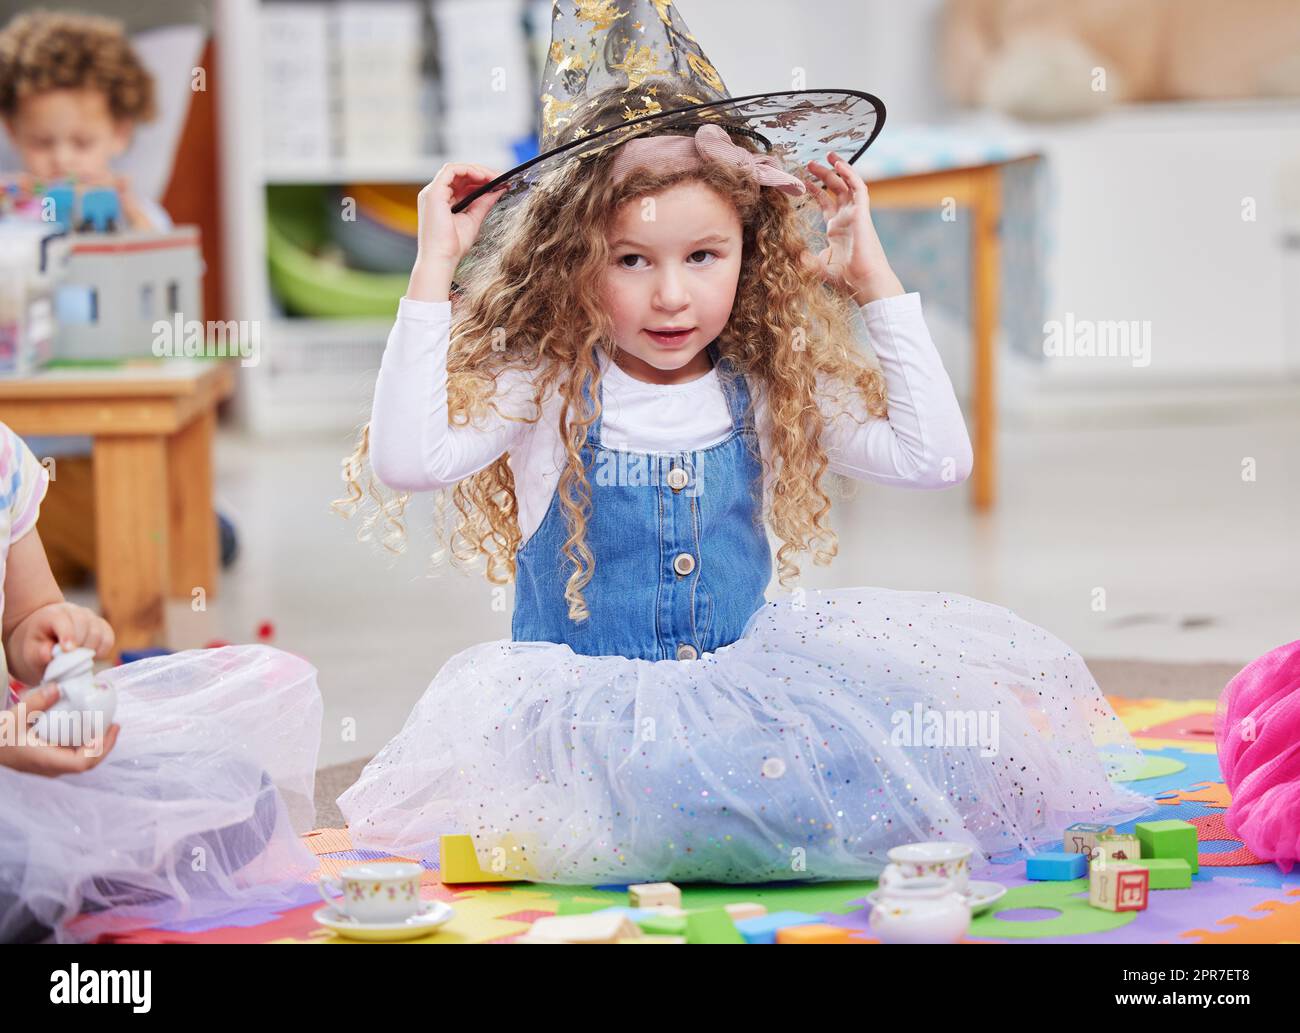 Dressing up is fun. Shot of a little girl playing dress-up in class. Stock Photo